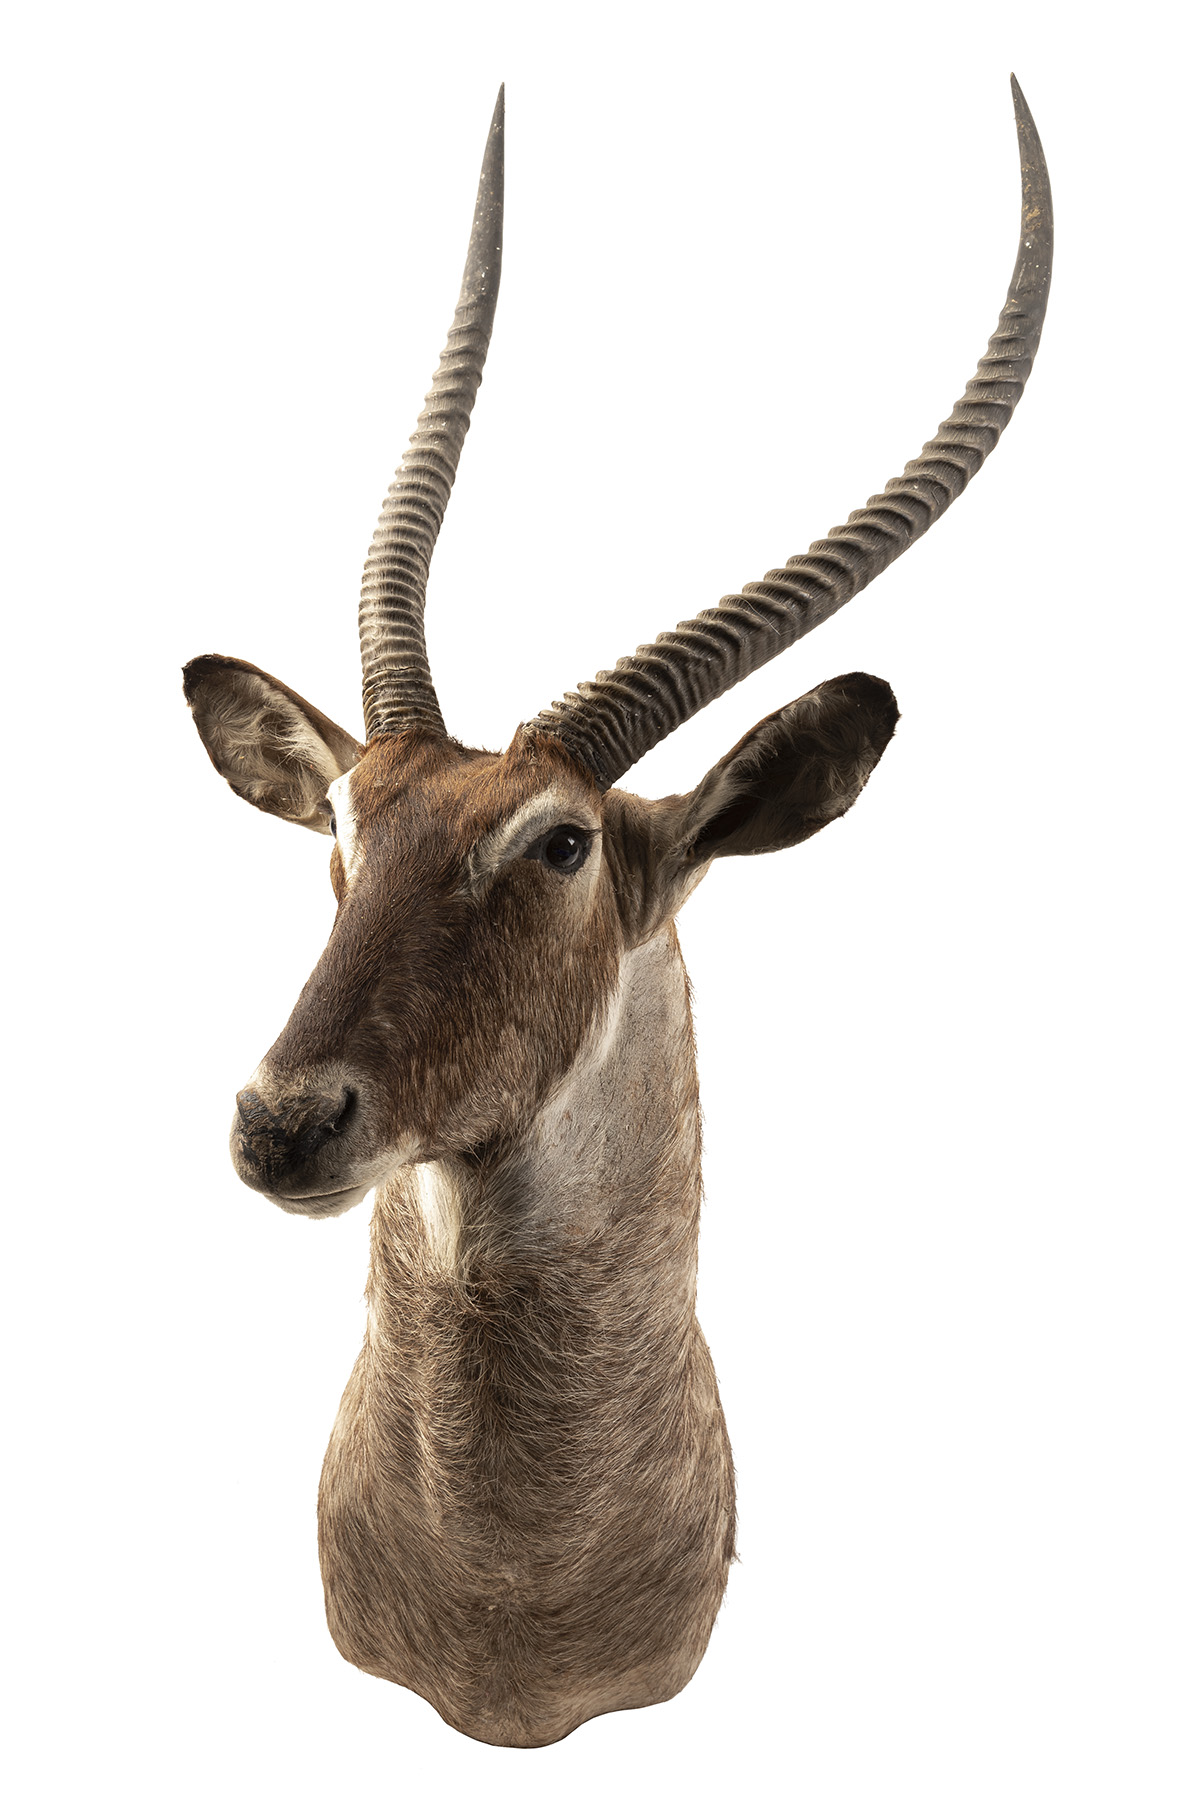 A CAPE AND HEAD MOUNT OF A WATERBUCK (kobus ellipsiprymnus), with 29in. horns.